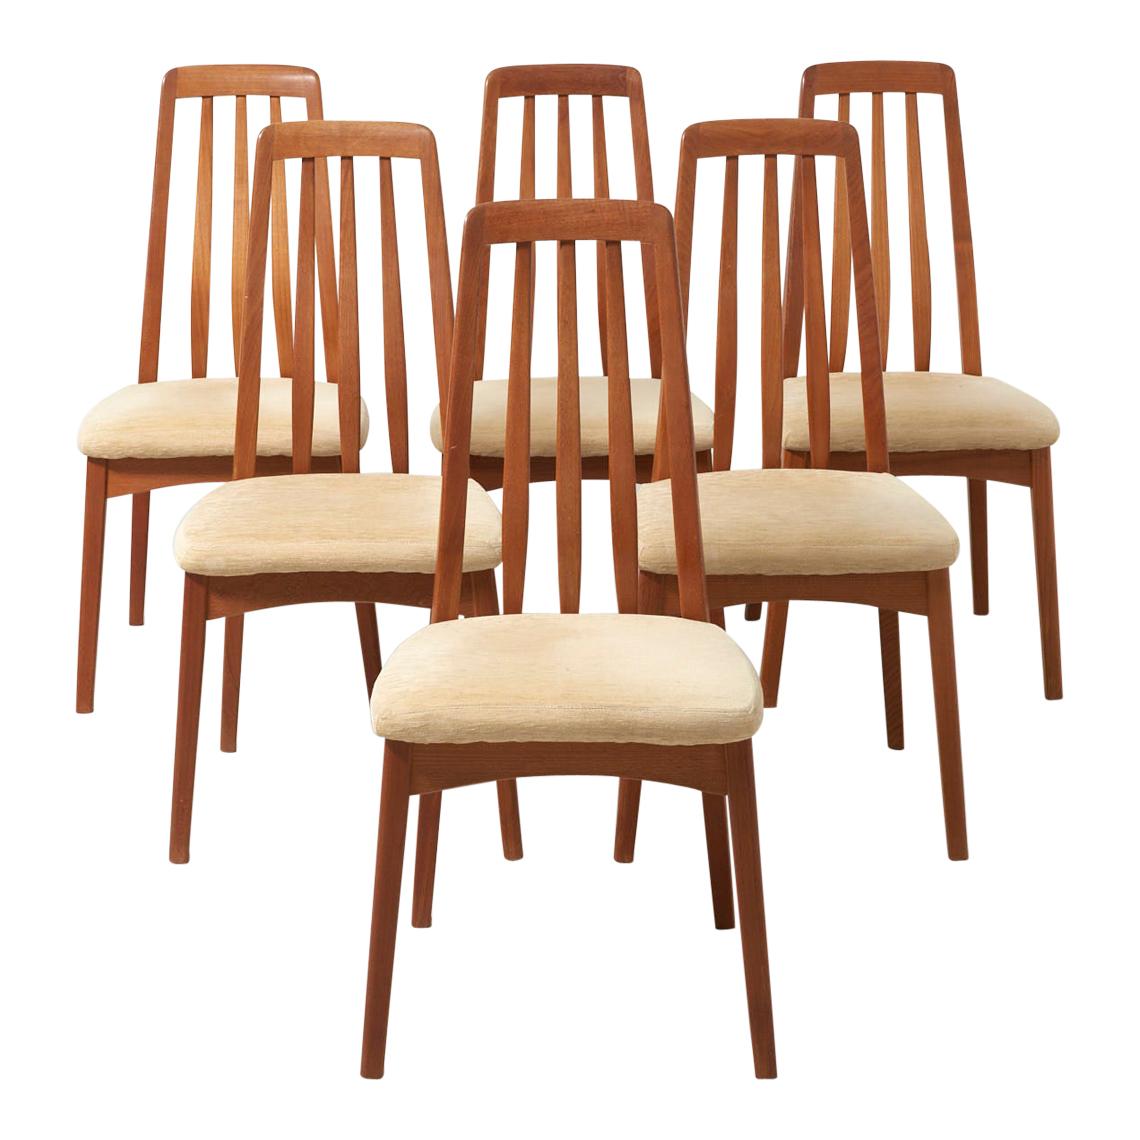 6 Eva Chairs by Niels Koefoed, 1960s For Sale